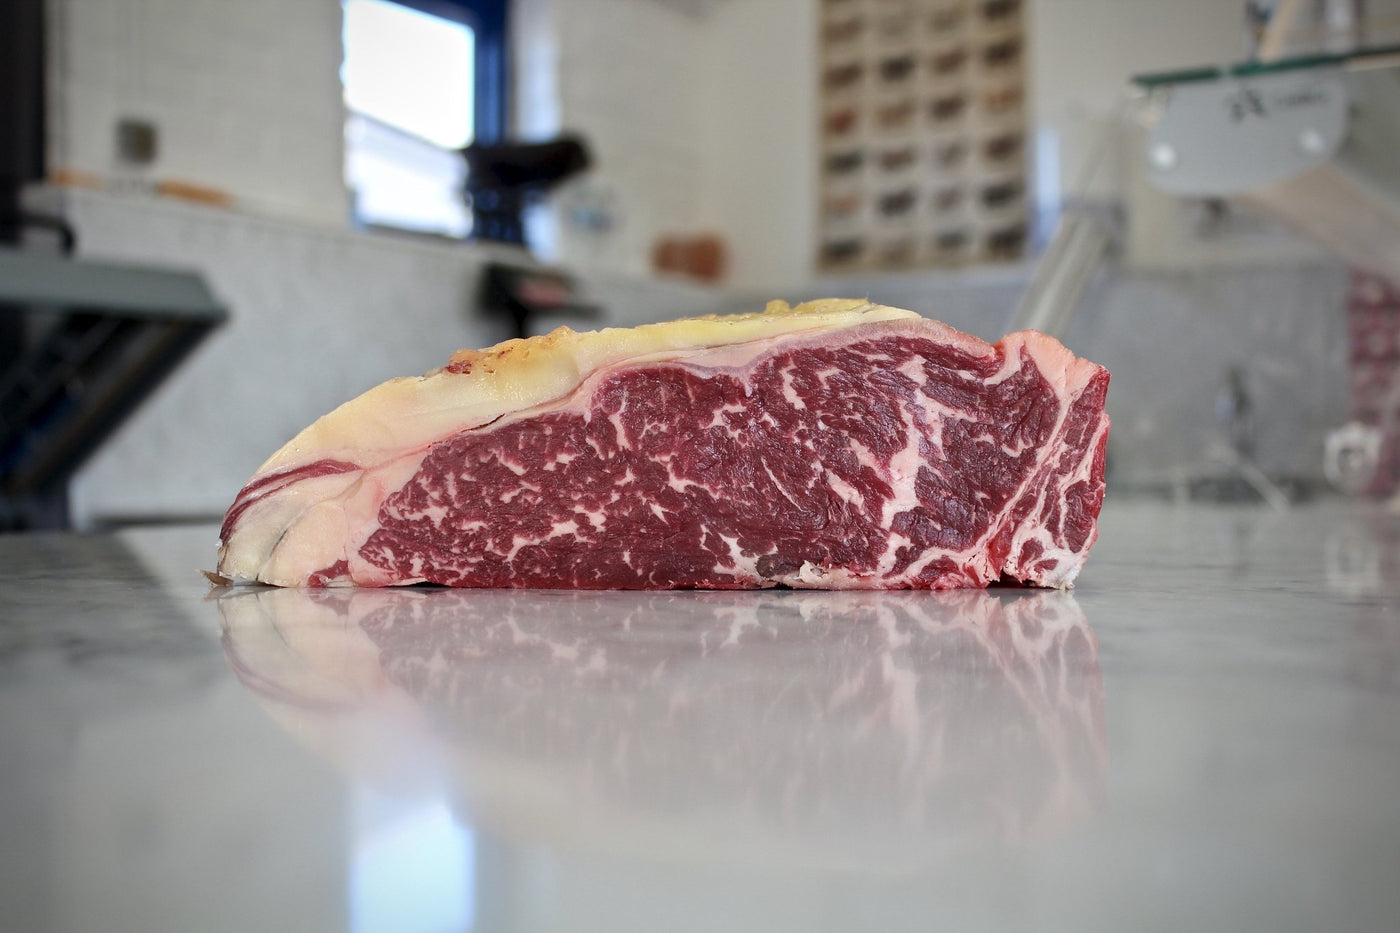 Dry-Aged Basque Region Sirloin - Beef - Thomas Joseph Butchery - Ethical Dry-Aged Meat The Best Steak UK Thomas Joseph Butchery